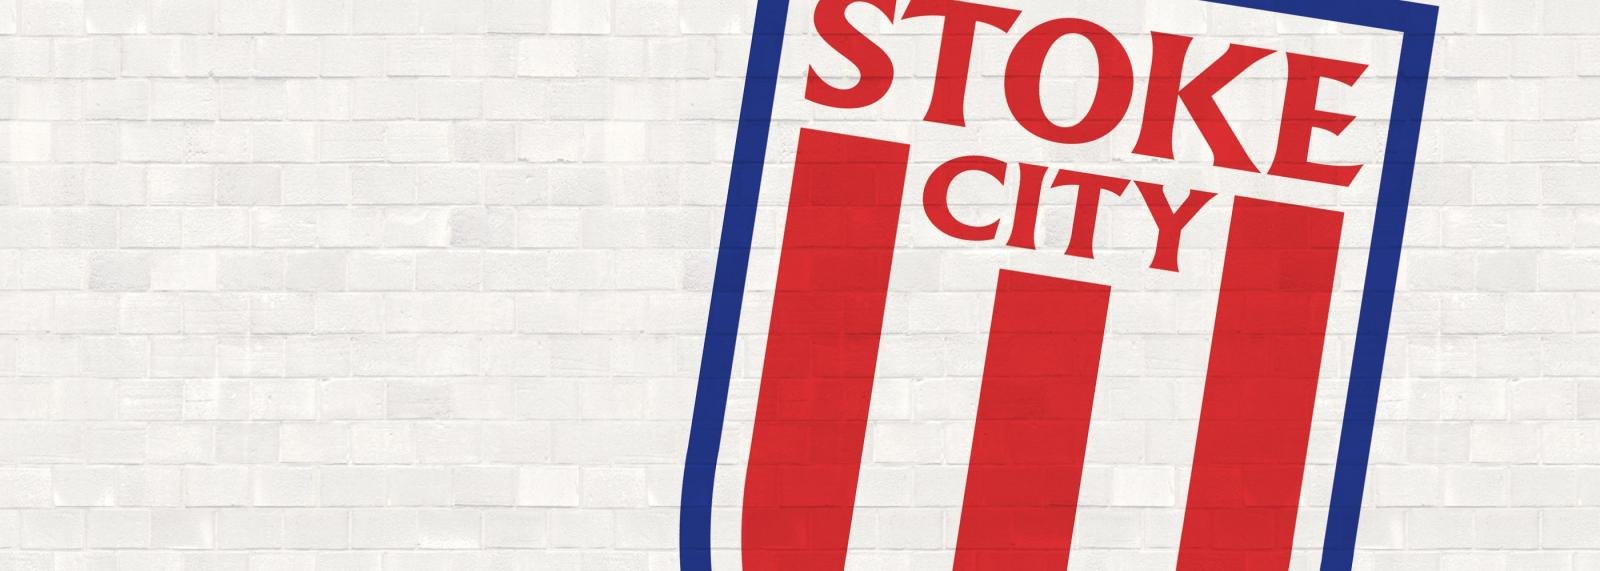 Injuries have hindered Stoke City’s season, but the Potters need a top 10 finish